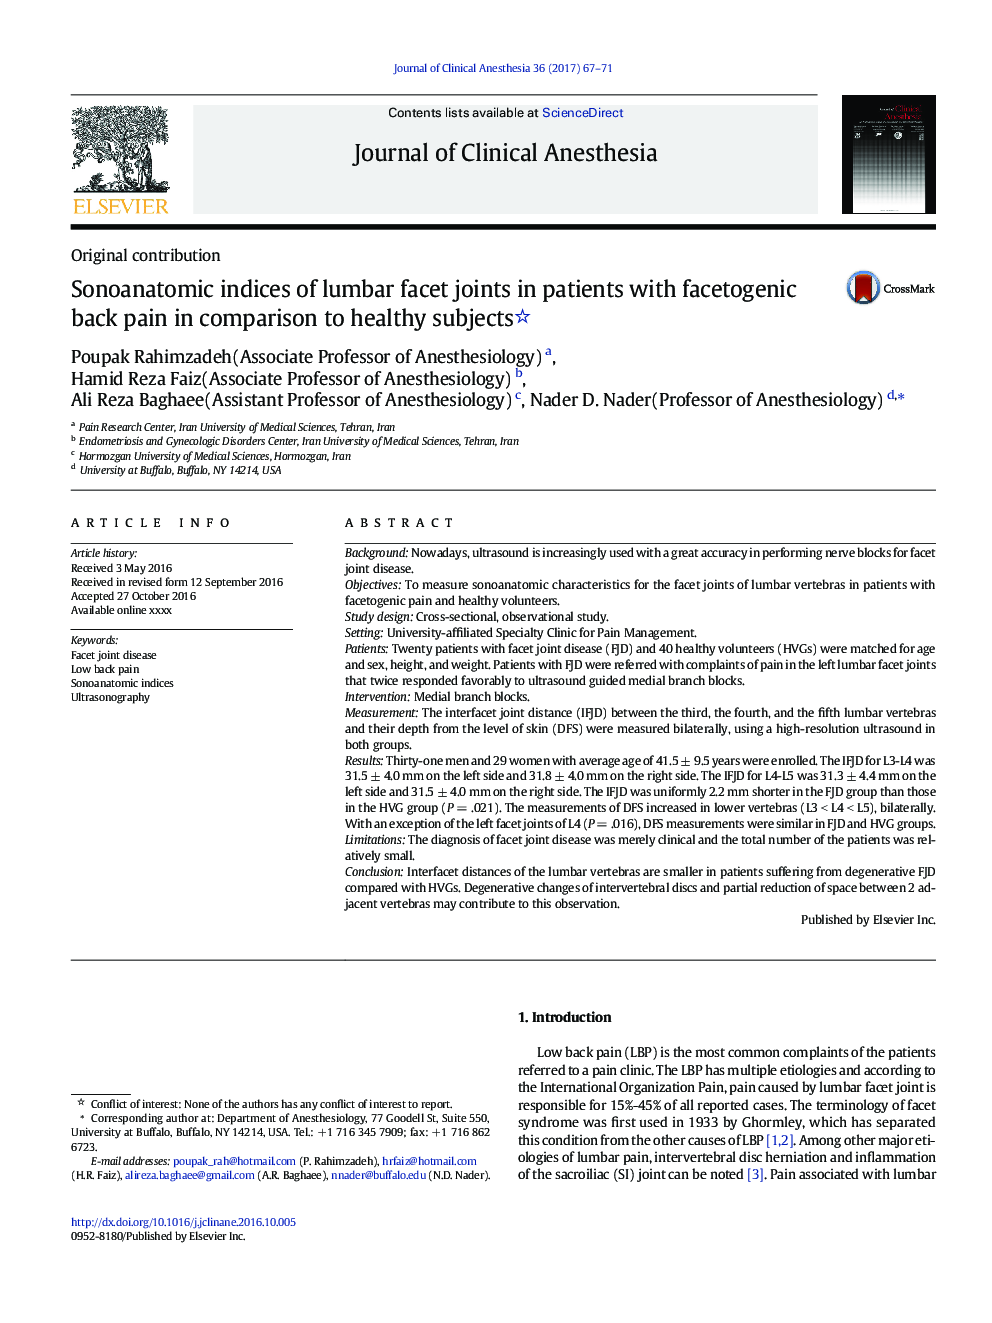 Sonoanatomic indices of lumbar facet joints in patients with facetogenic back pain in comparison to healthy subjects